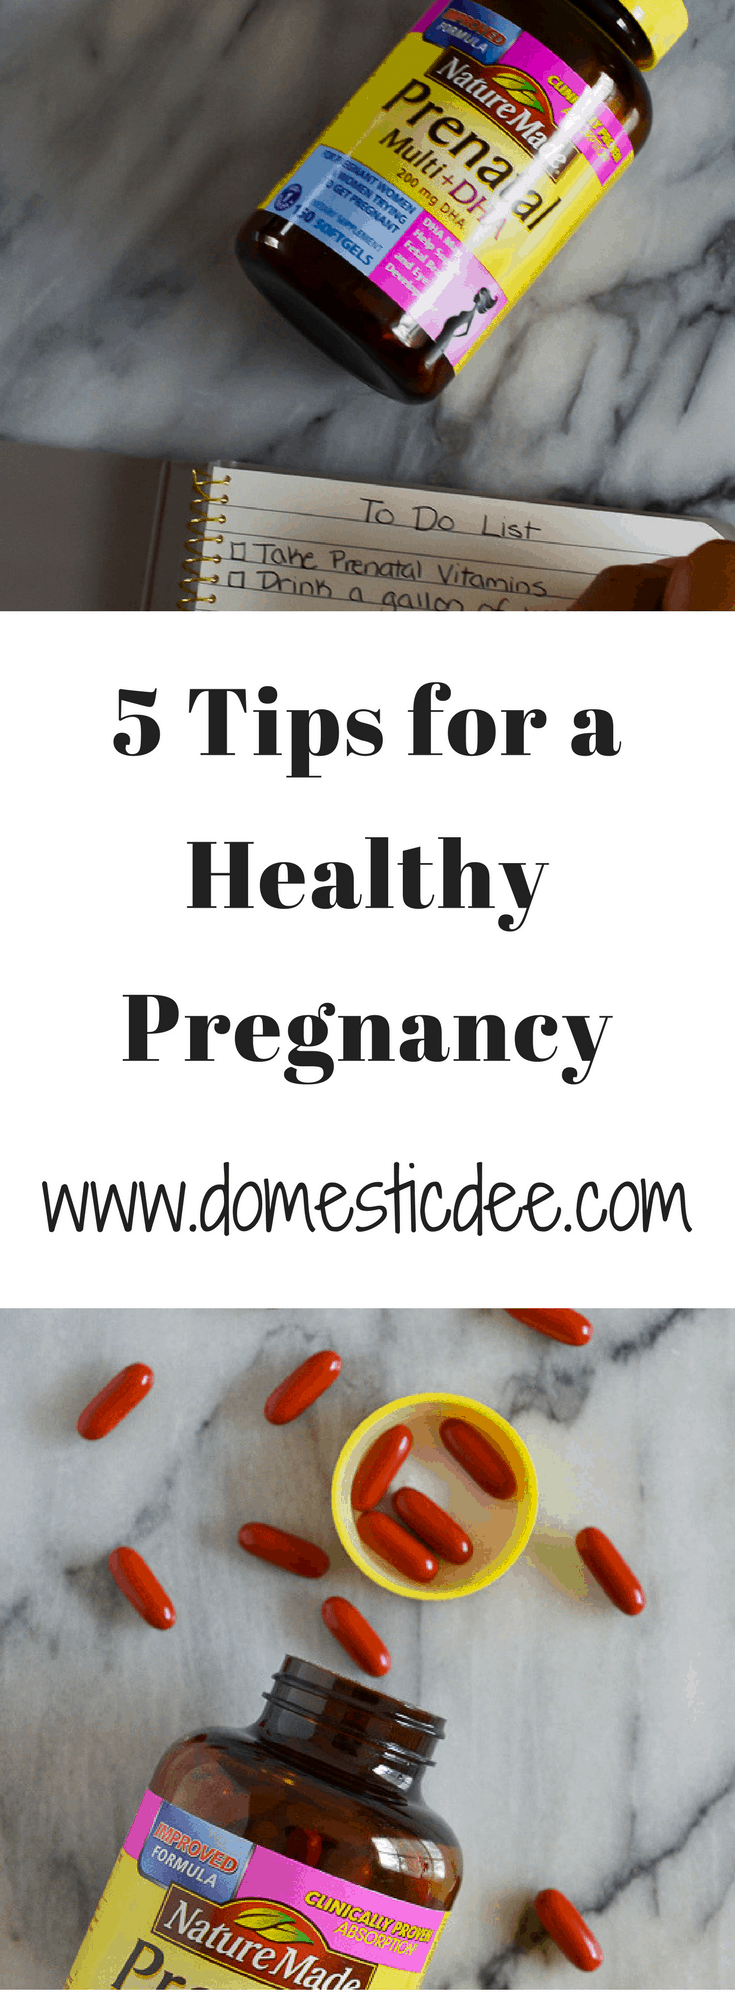 5 Tips to a Healthy Pregnancy